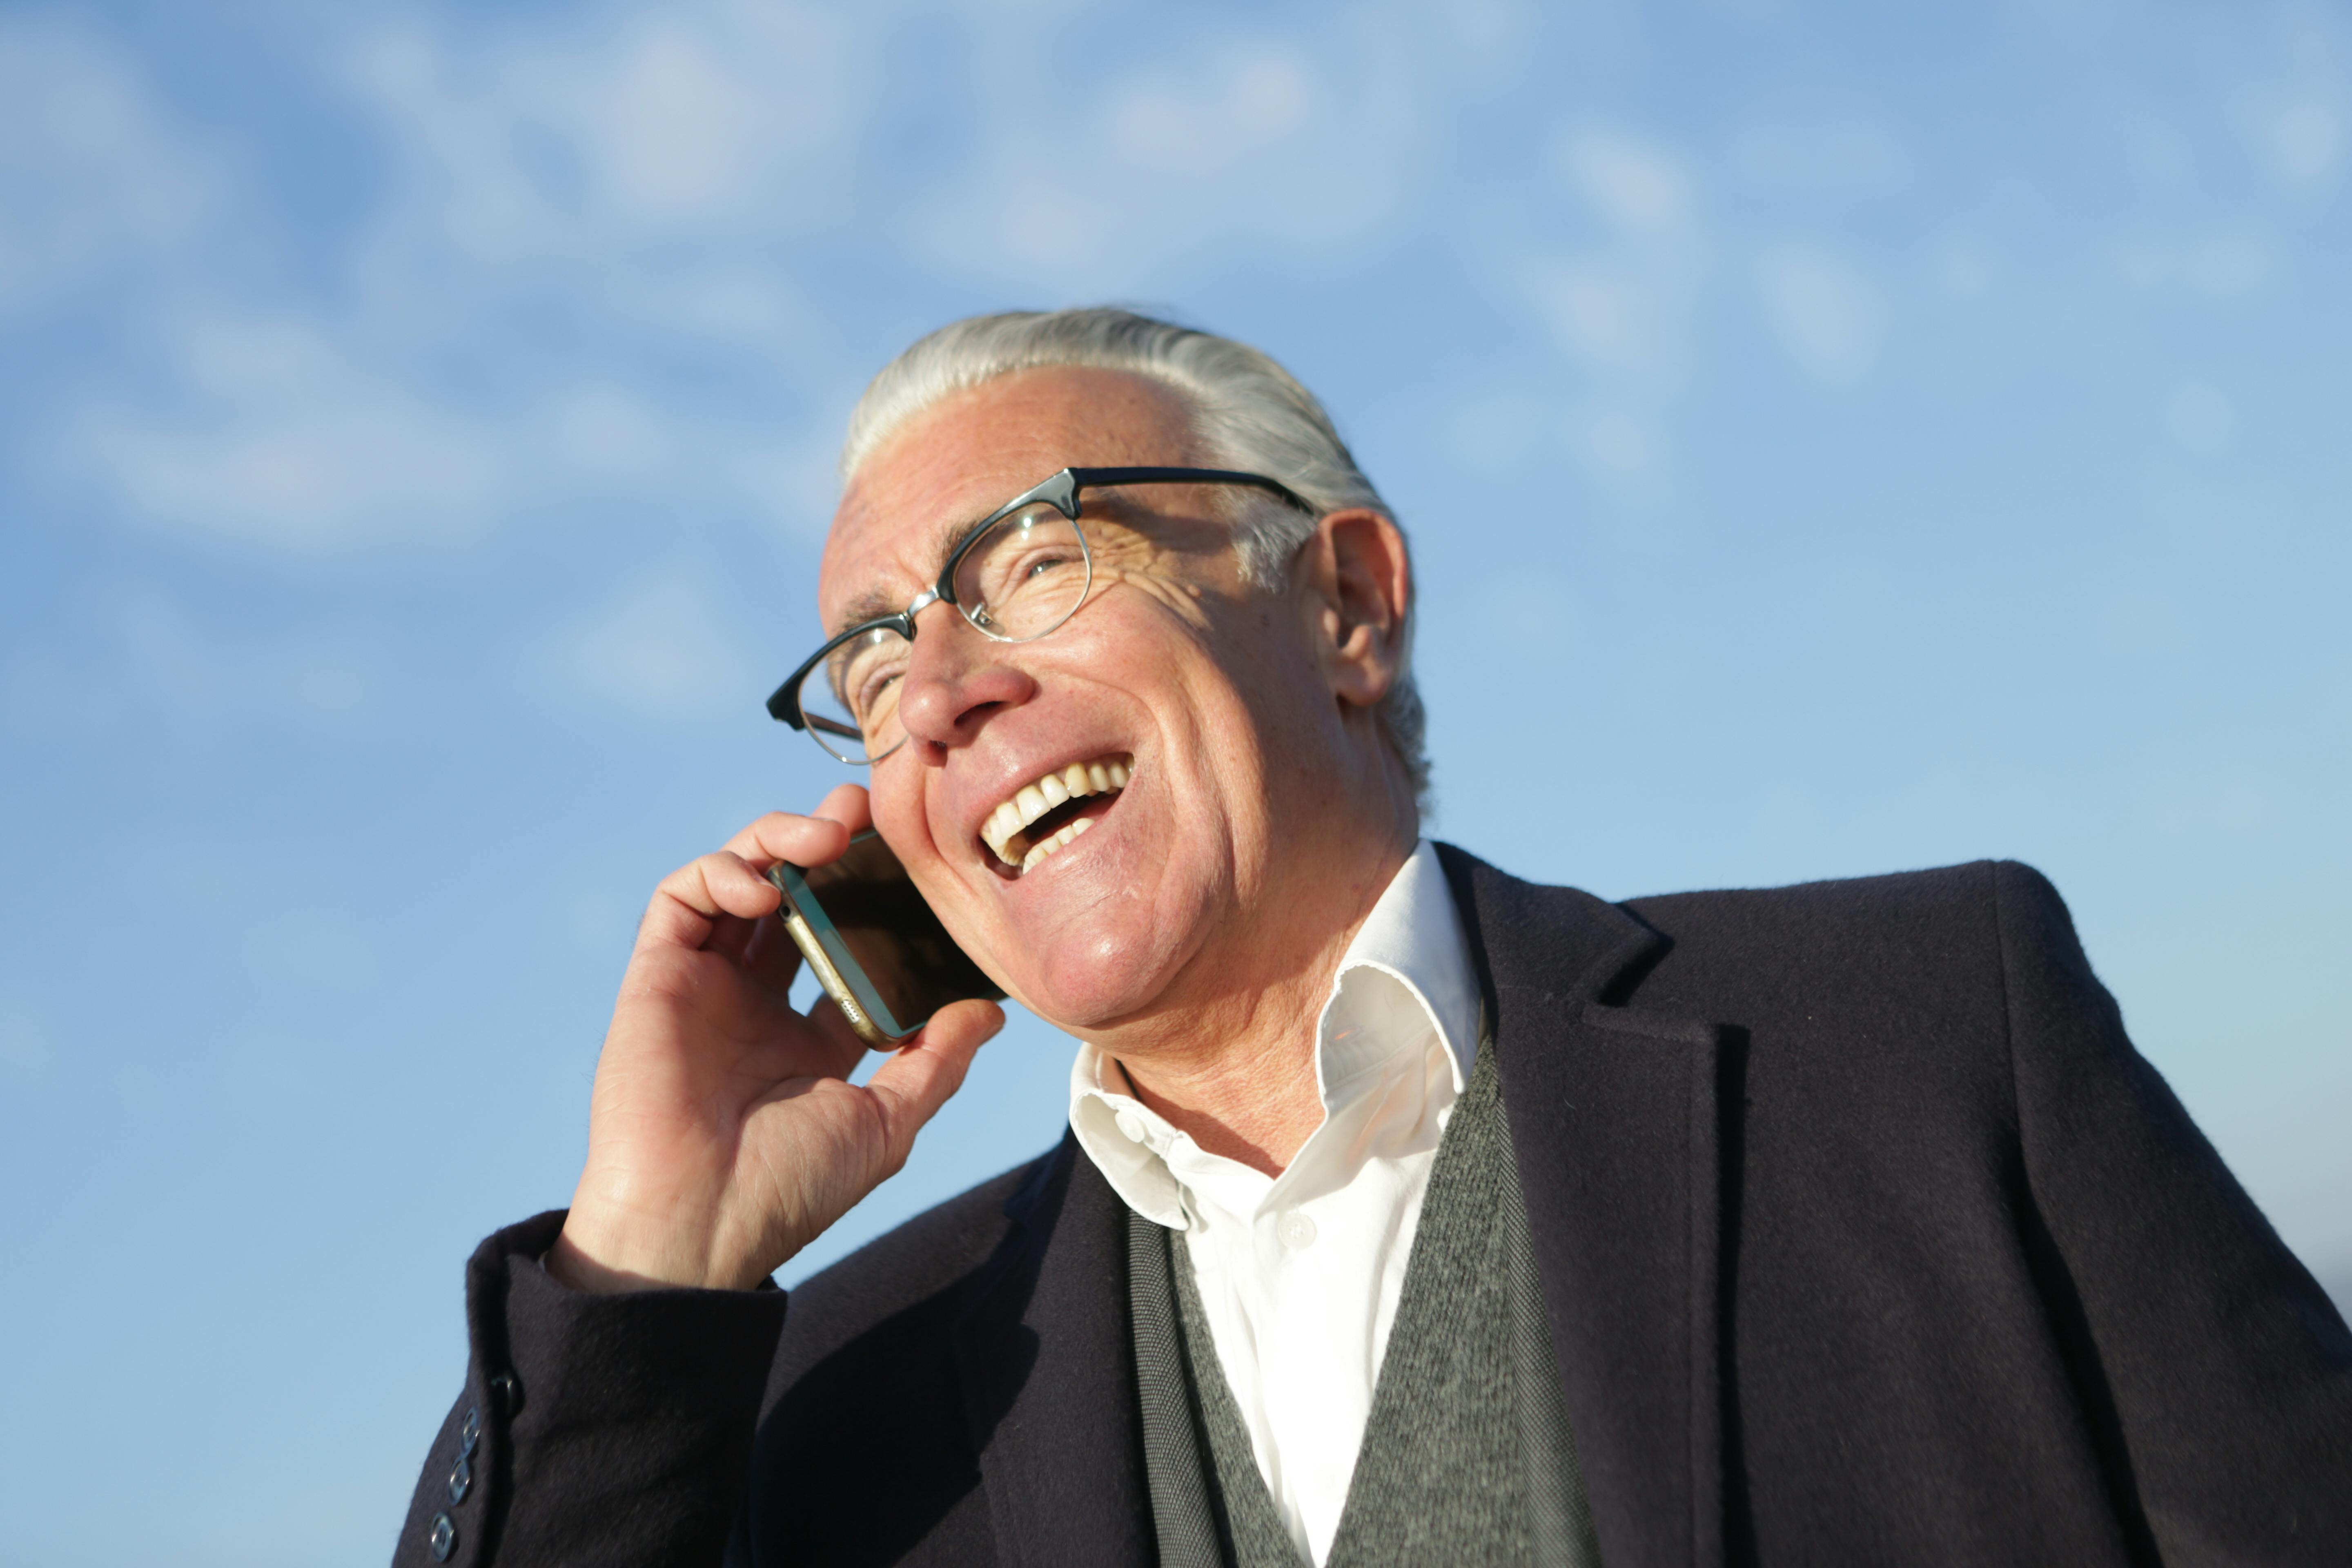 A happy older man on the phone | Source: Pexels